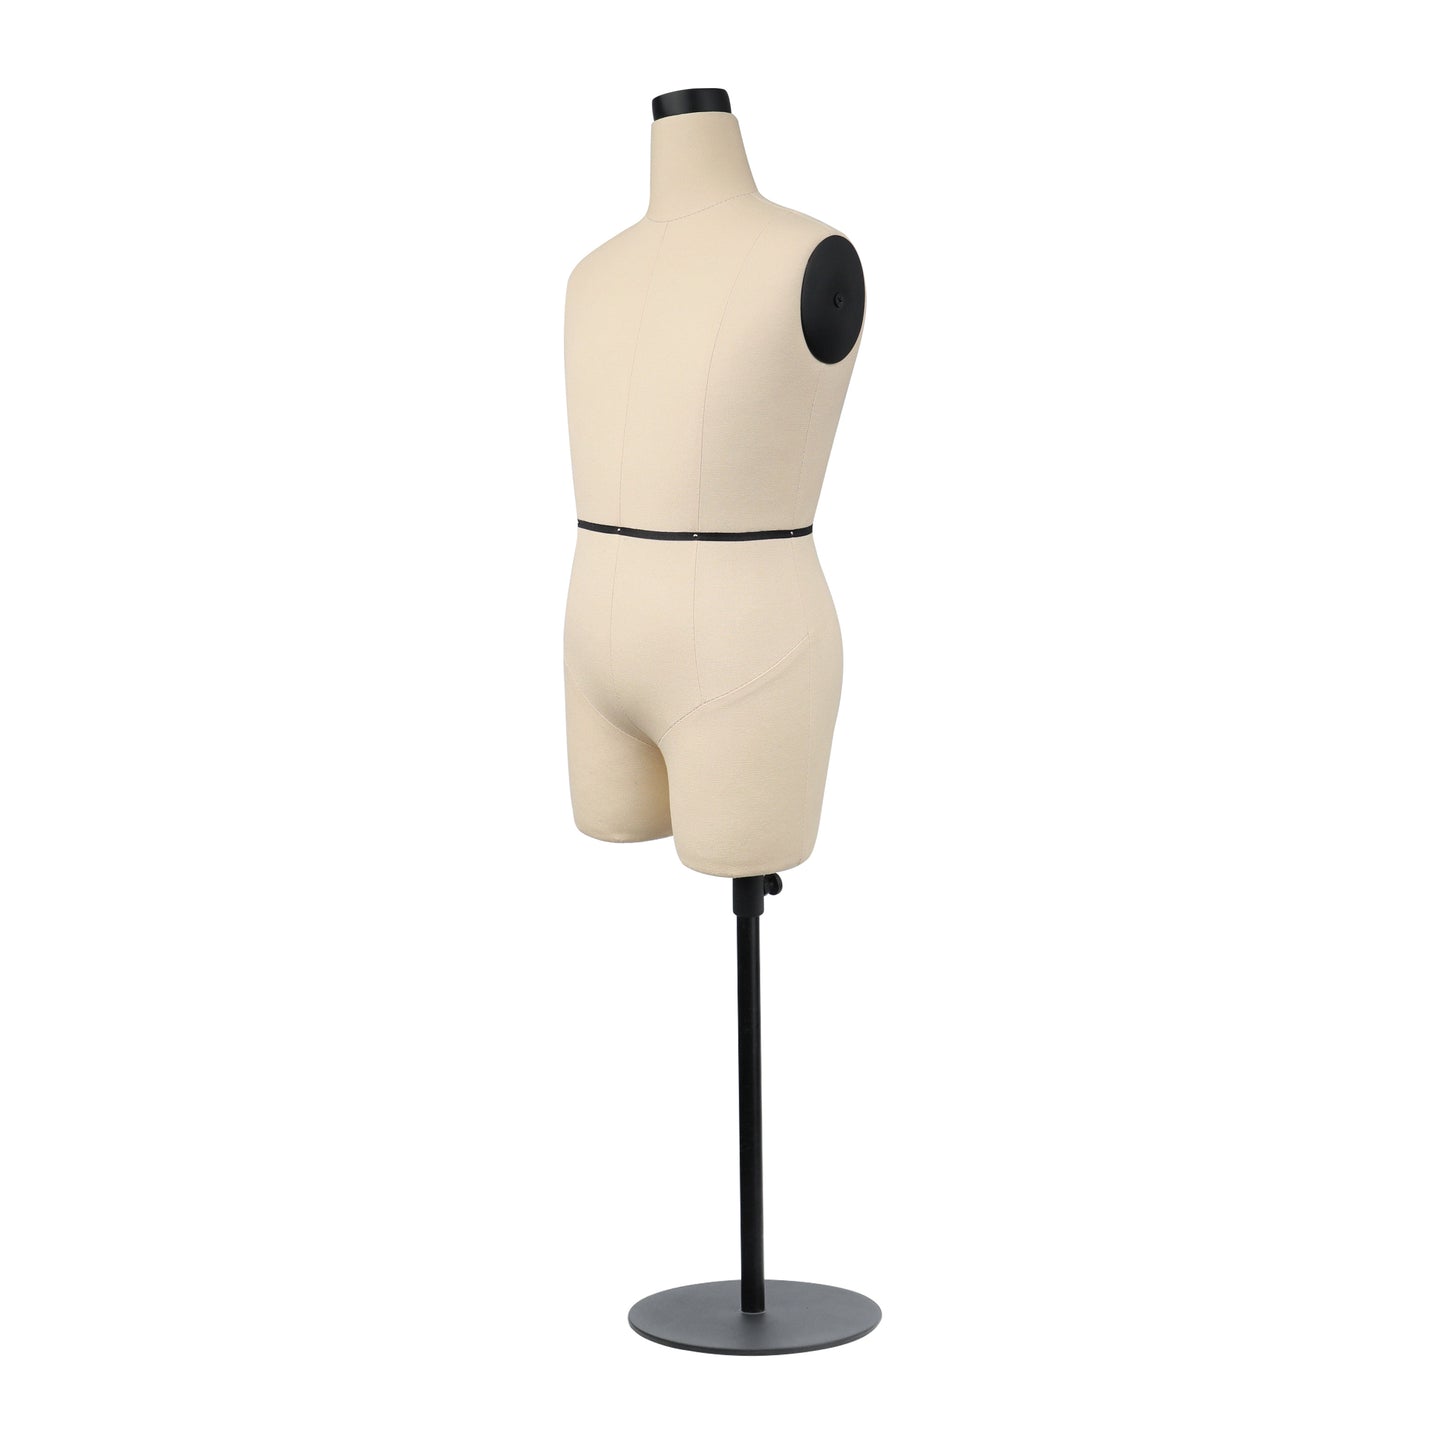 Jelimate Male Half Scale Dress Form For Sewing,Mini Tailor Mannequin for Fashion Designer Pattern Making,Miniature Men Sewing Mannequin for Fashion School Draping Mannequin